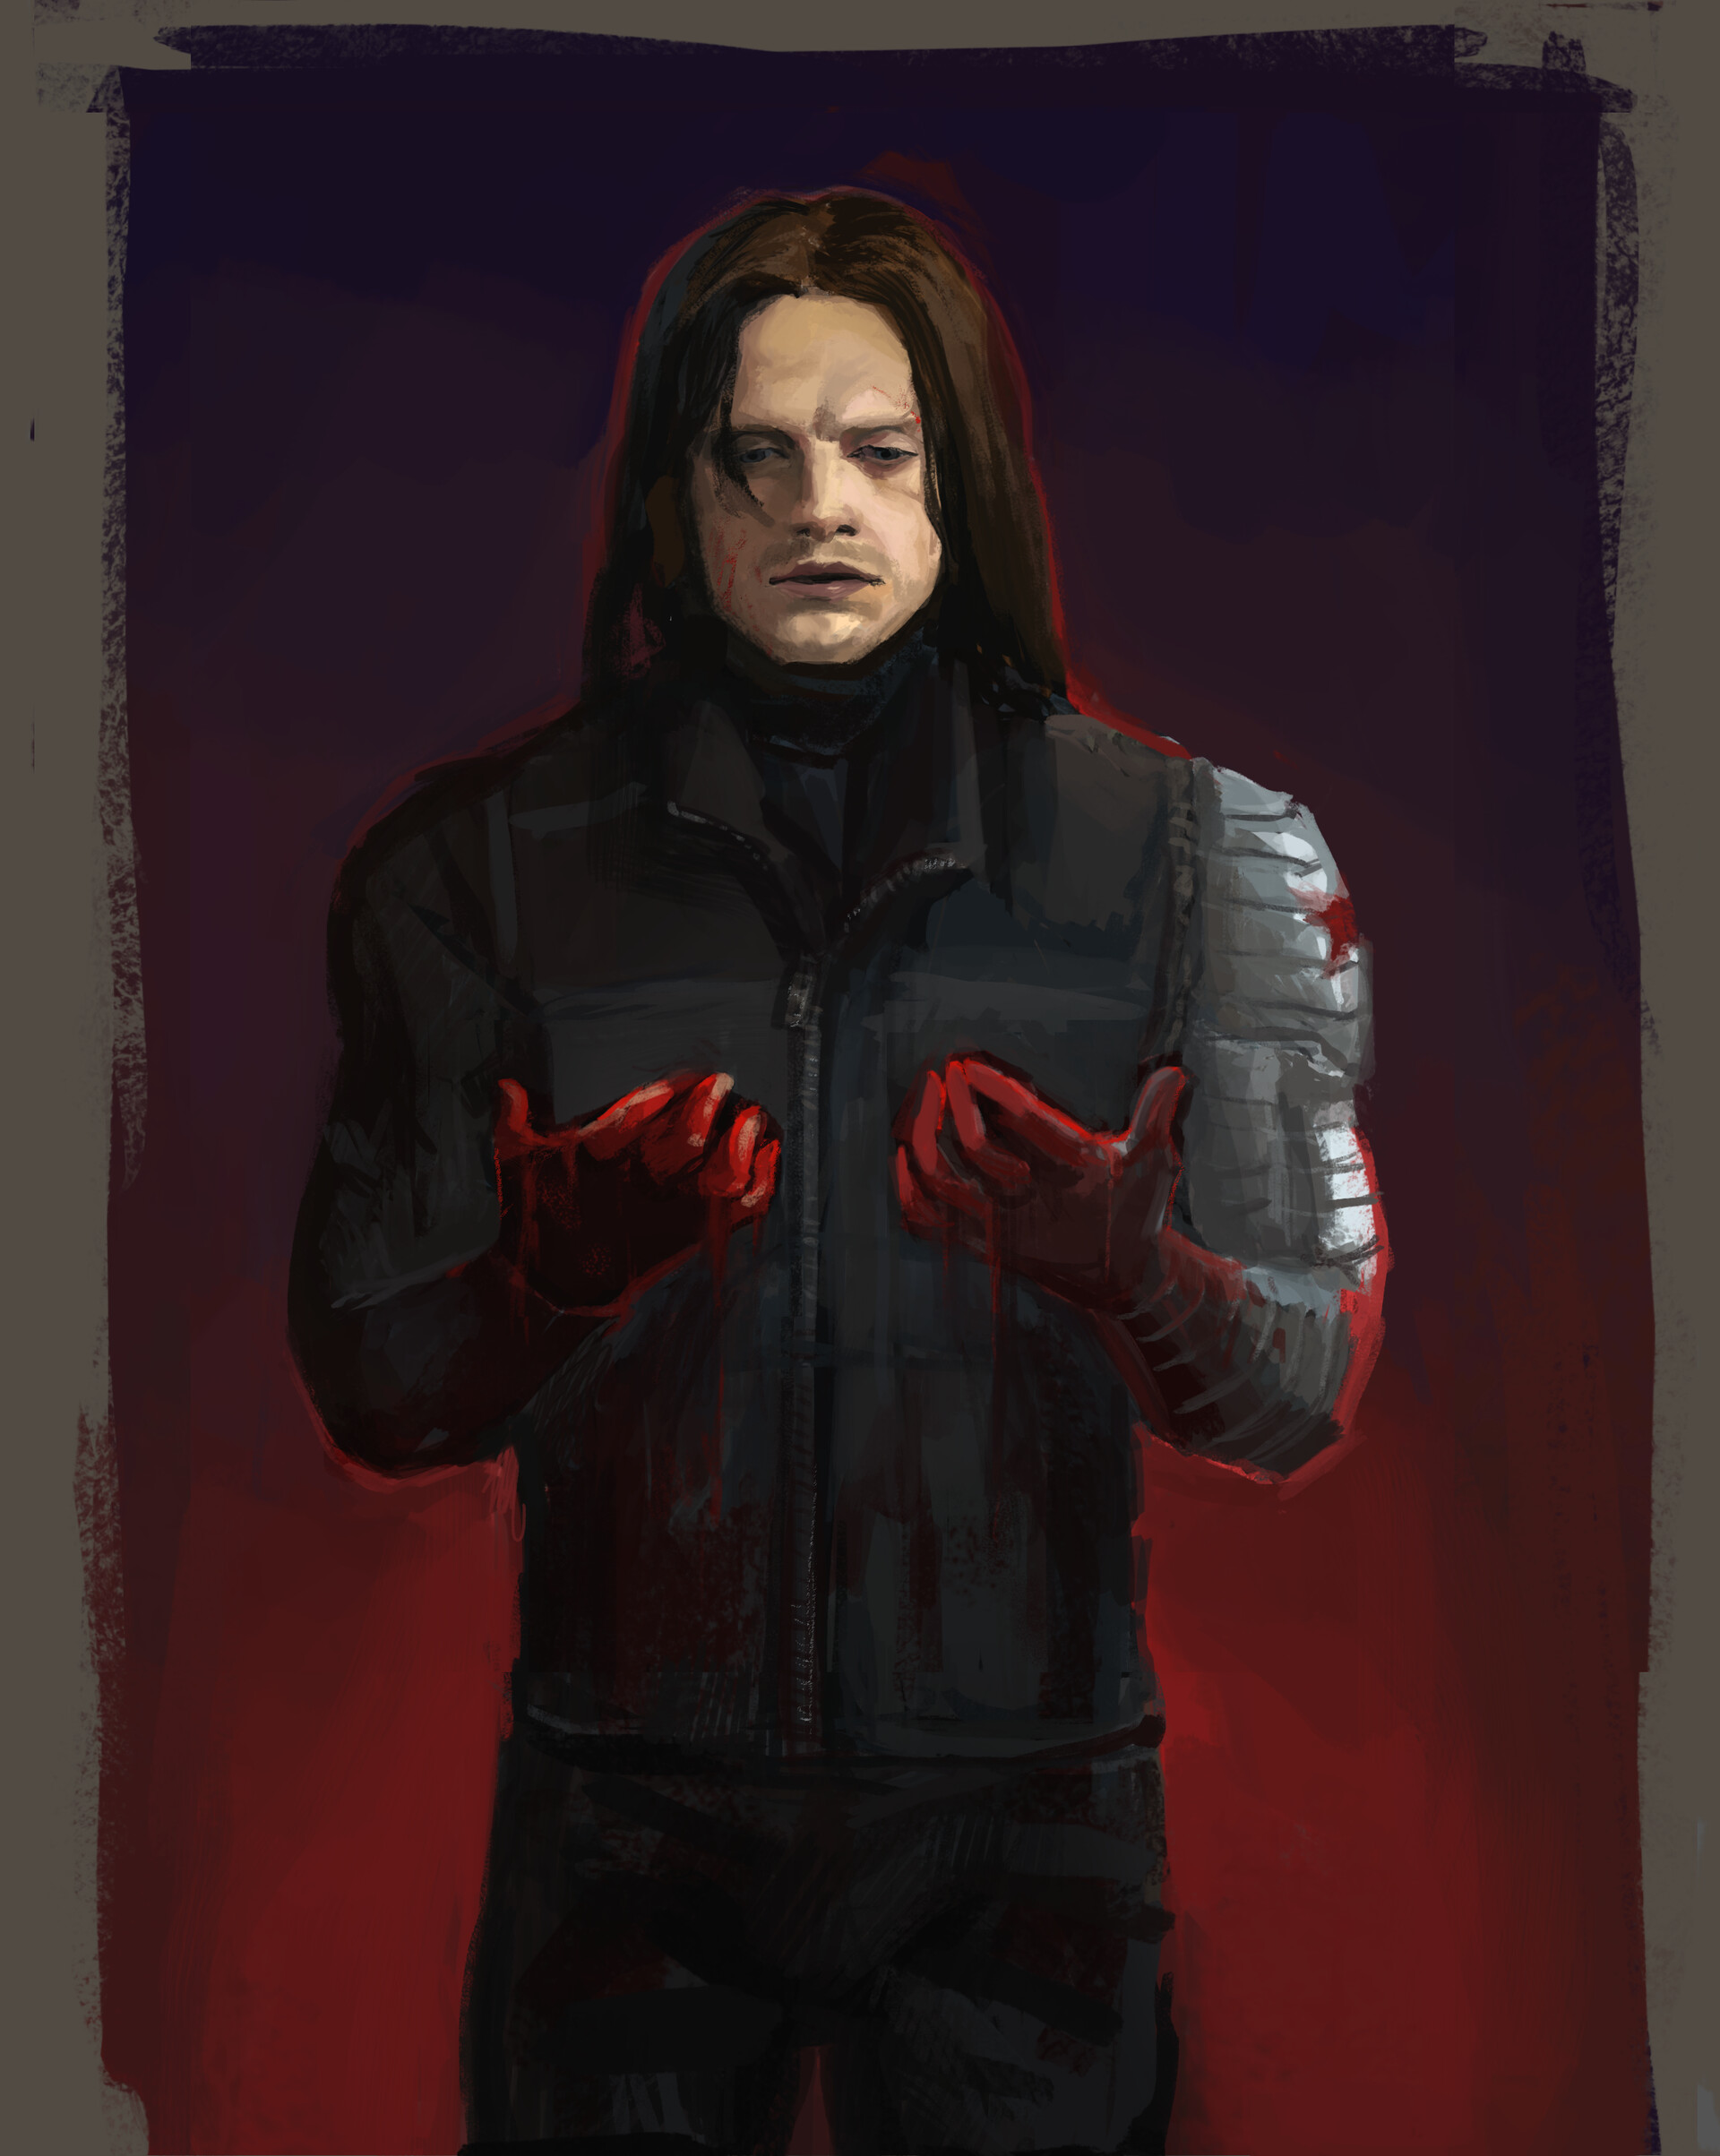 Marvel fan art, Bucky Barnes. "What have I become?" - he ...